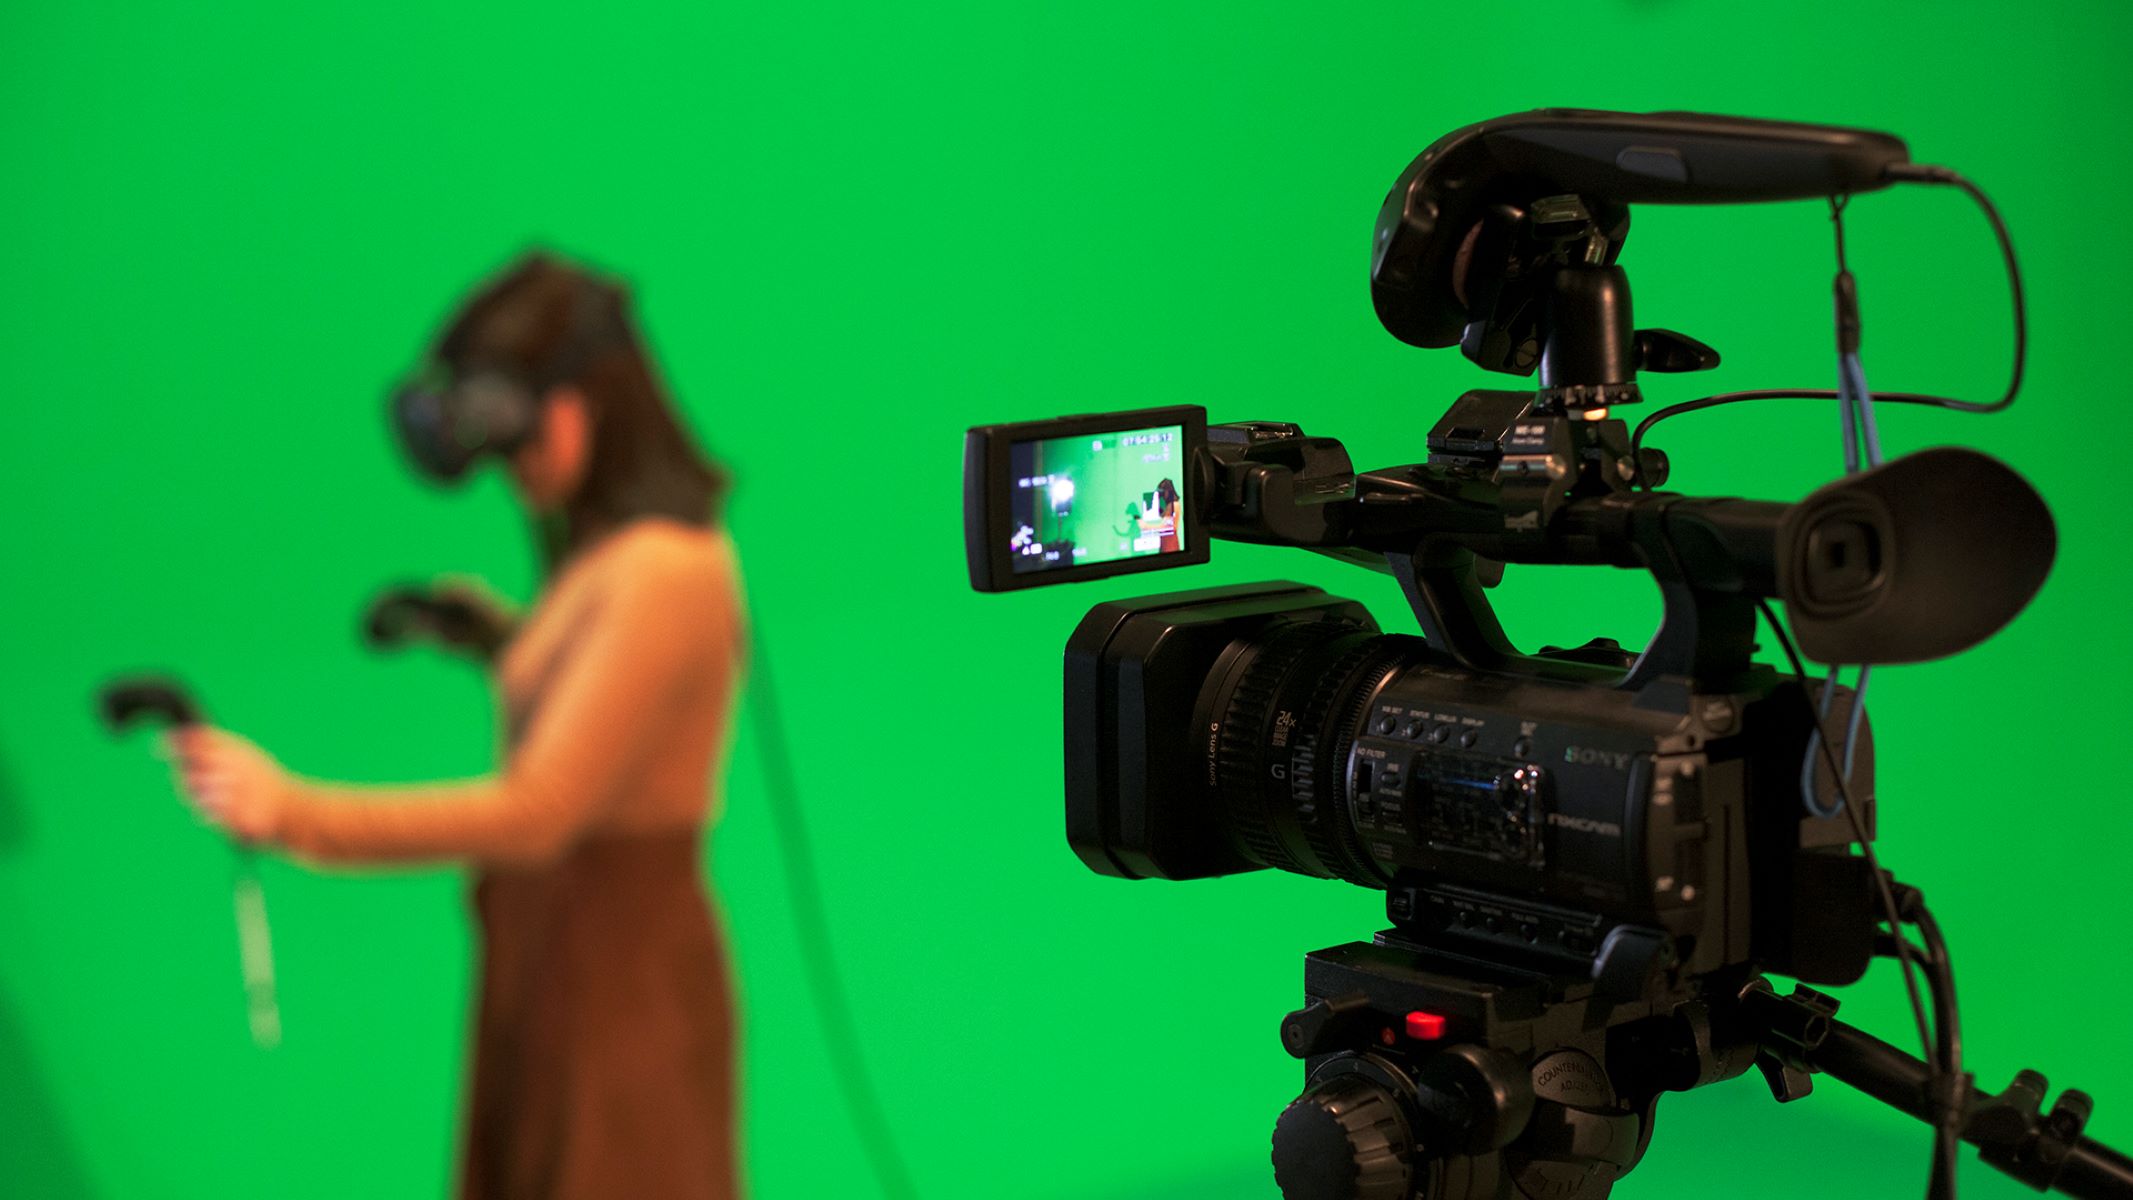 How To Make Green Screen Video On HTC Vive